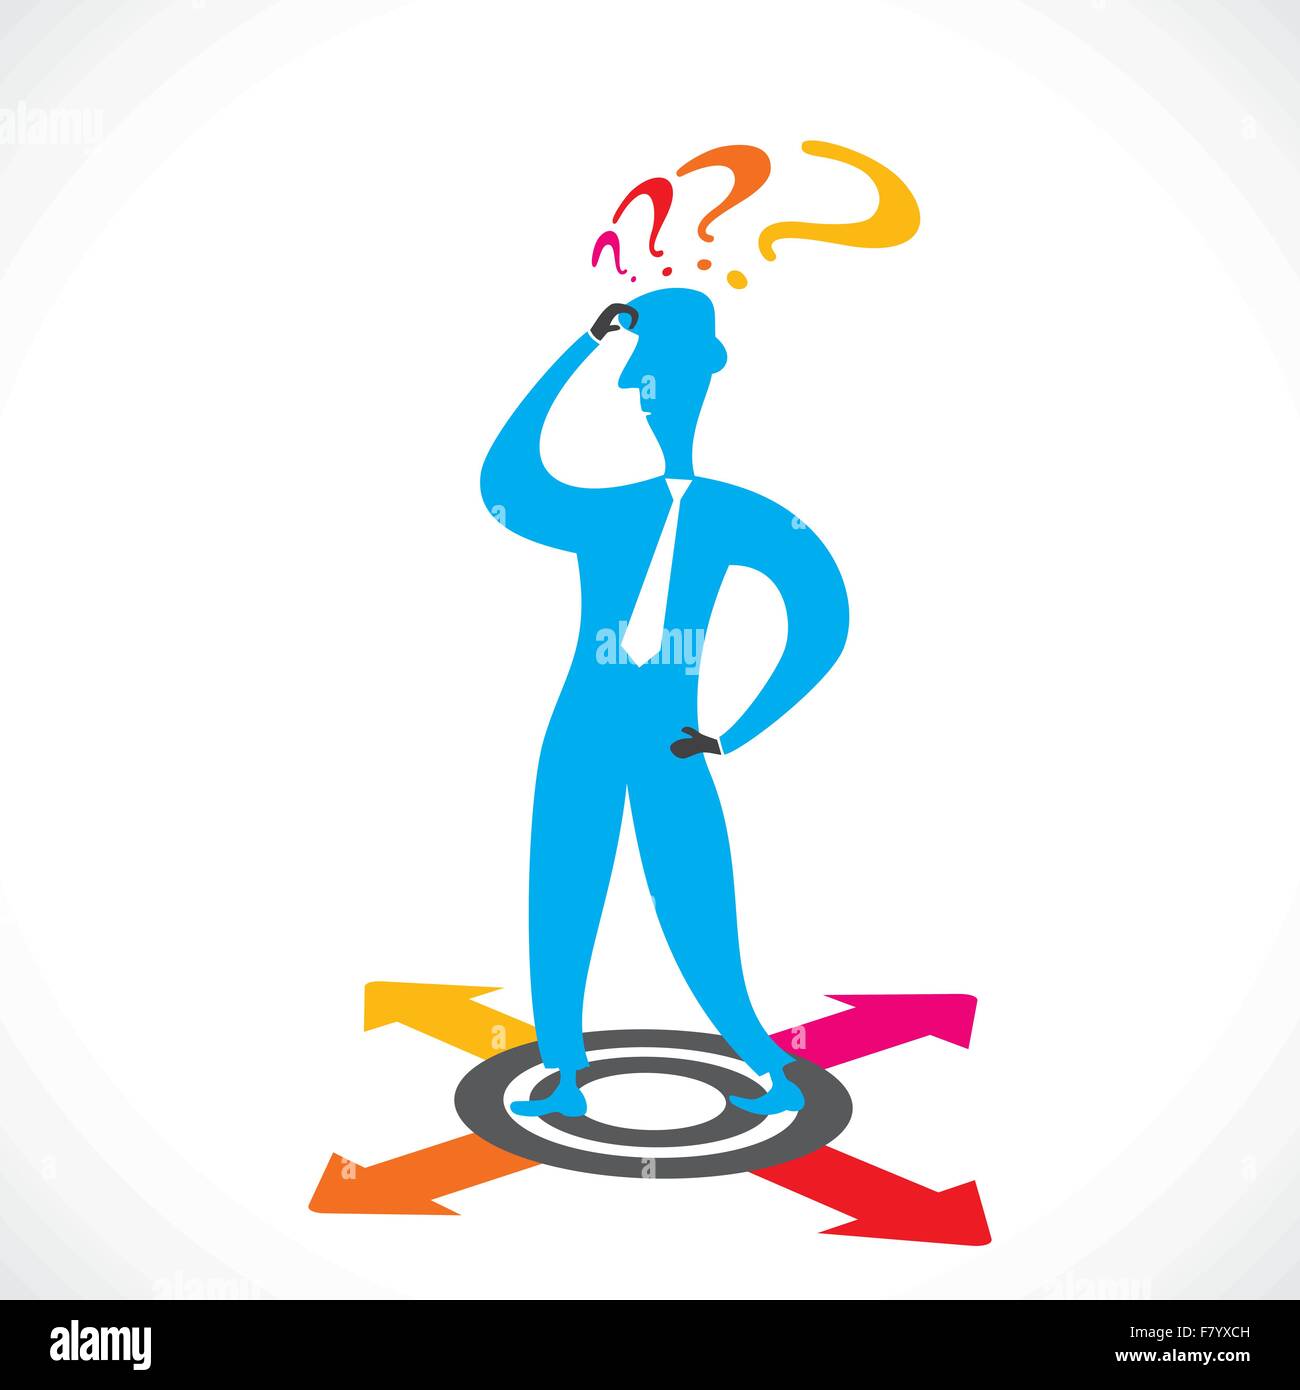 confuse men about direction stock vector Stock Vector